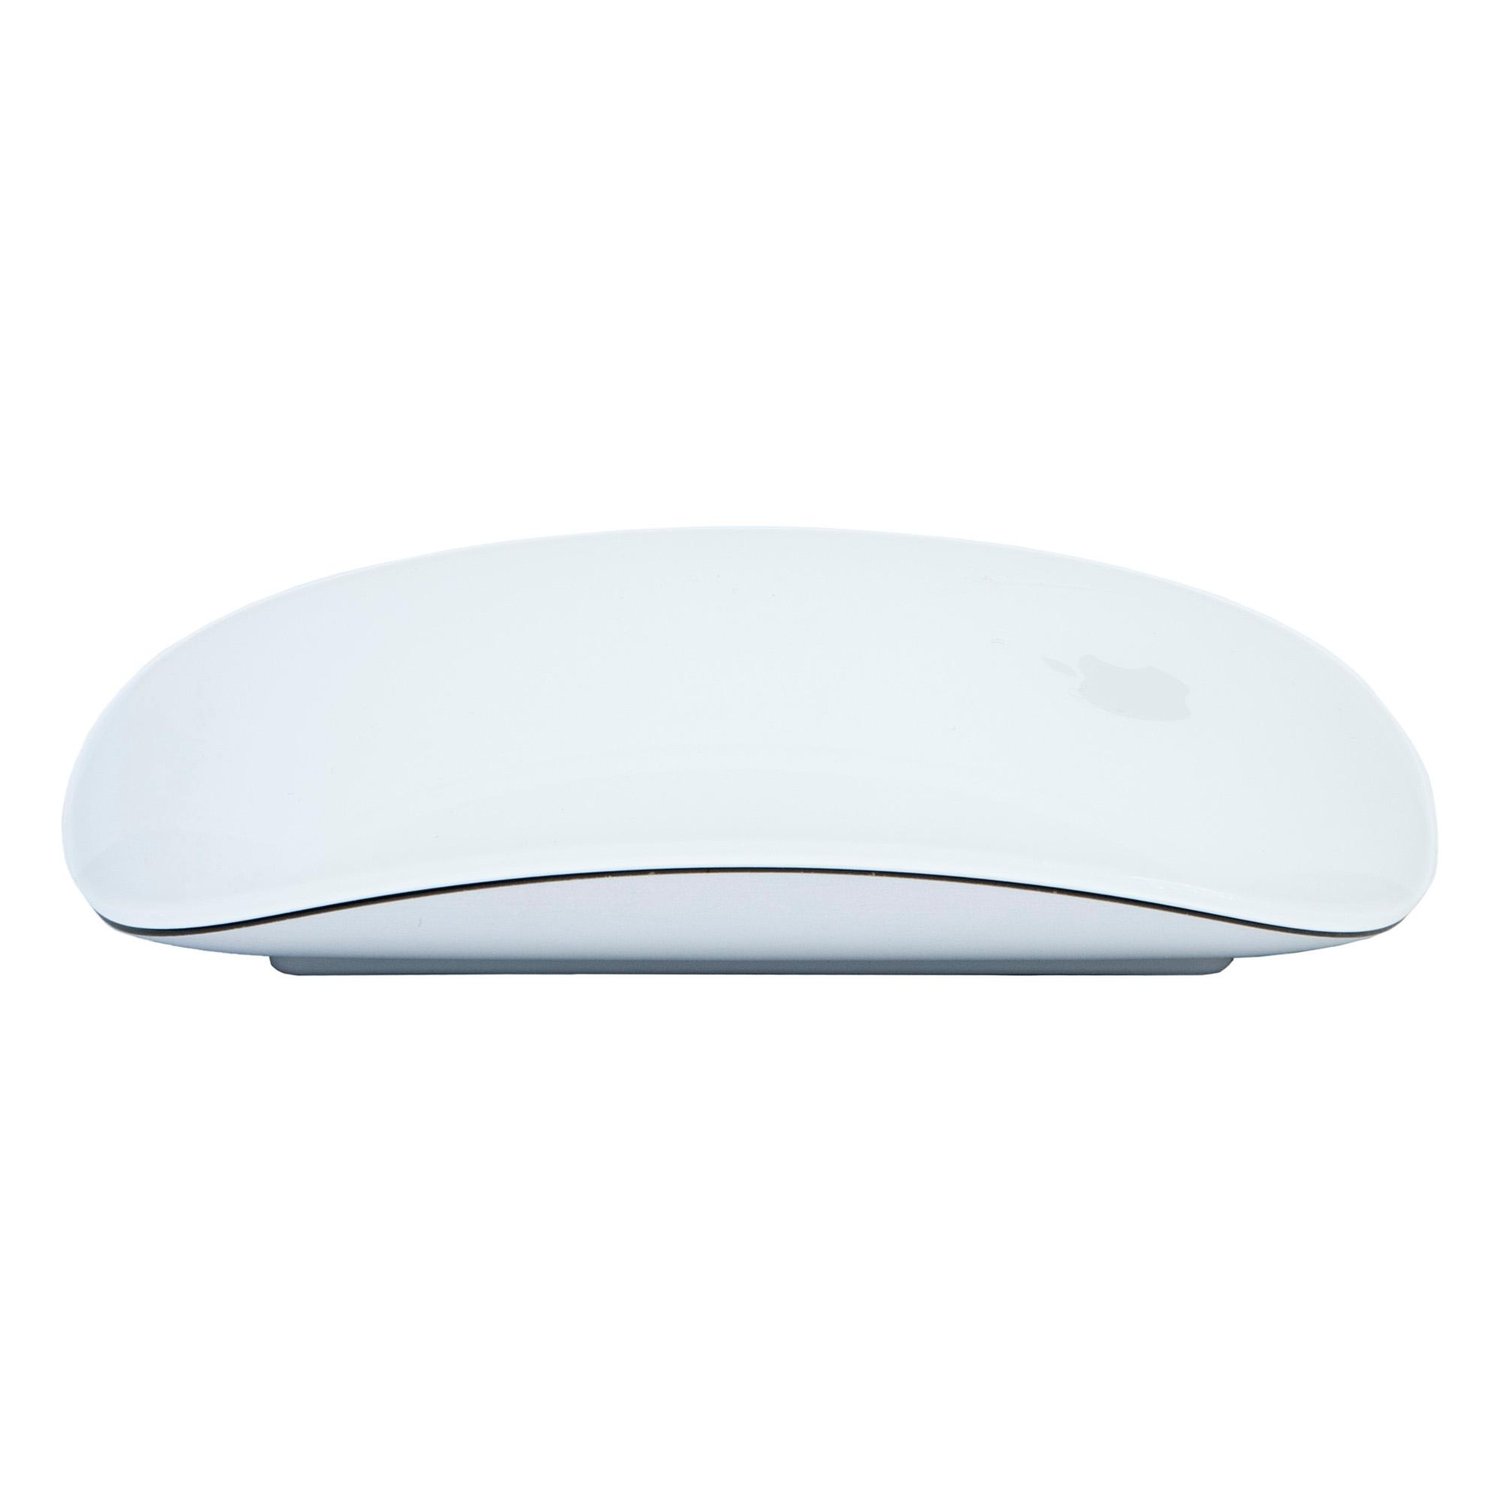 Apple Magic Mouse 2 (Wireless/Rechargeable) - Silver